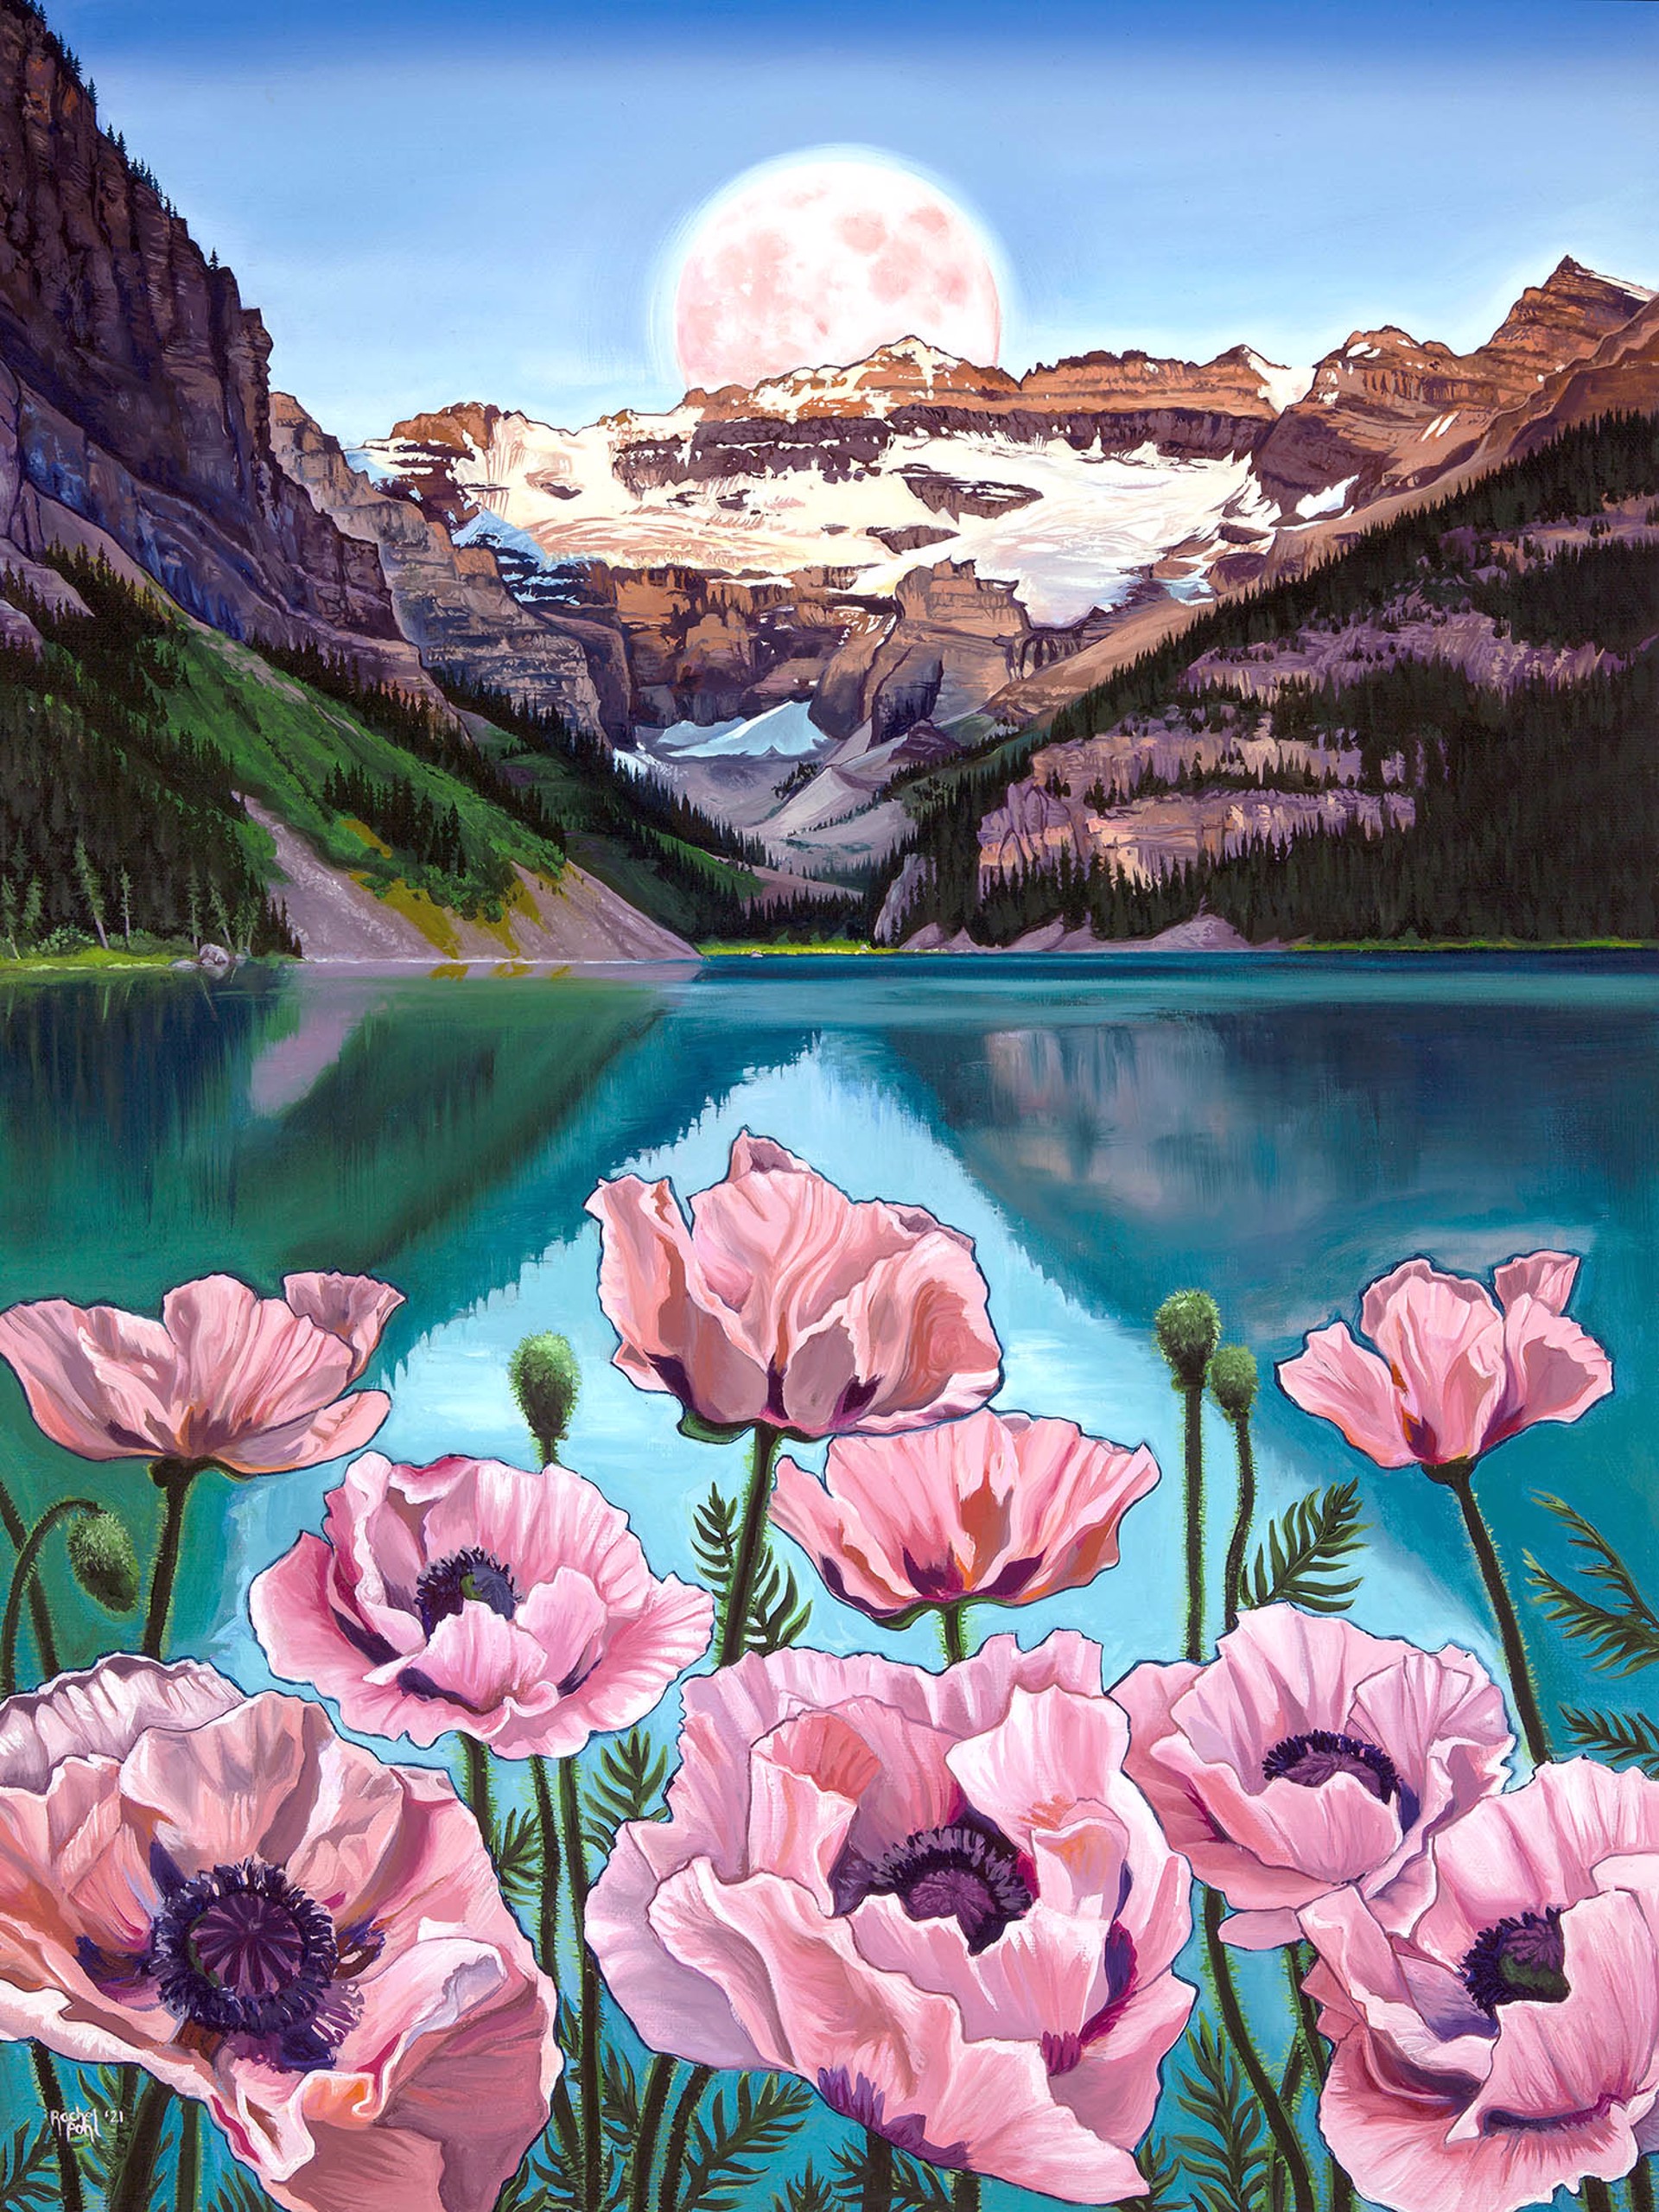 Mountain Landscape Under Moonlight With Pink Poppies And An Alpine Lake